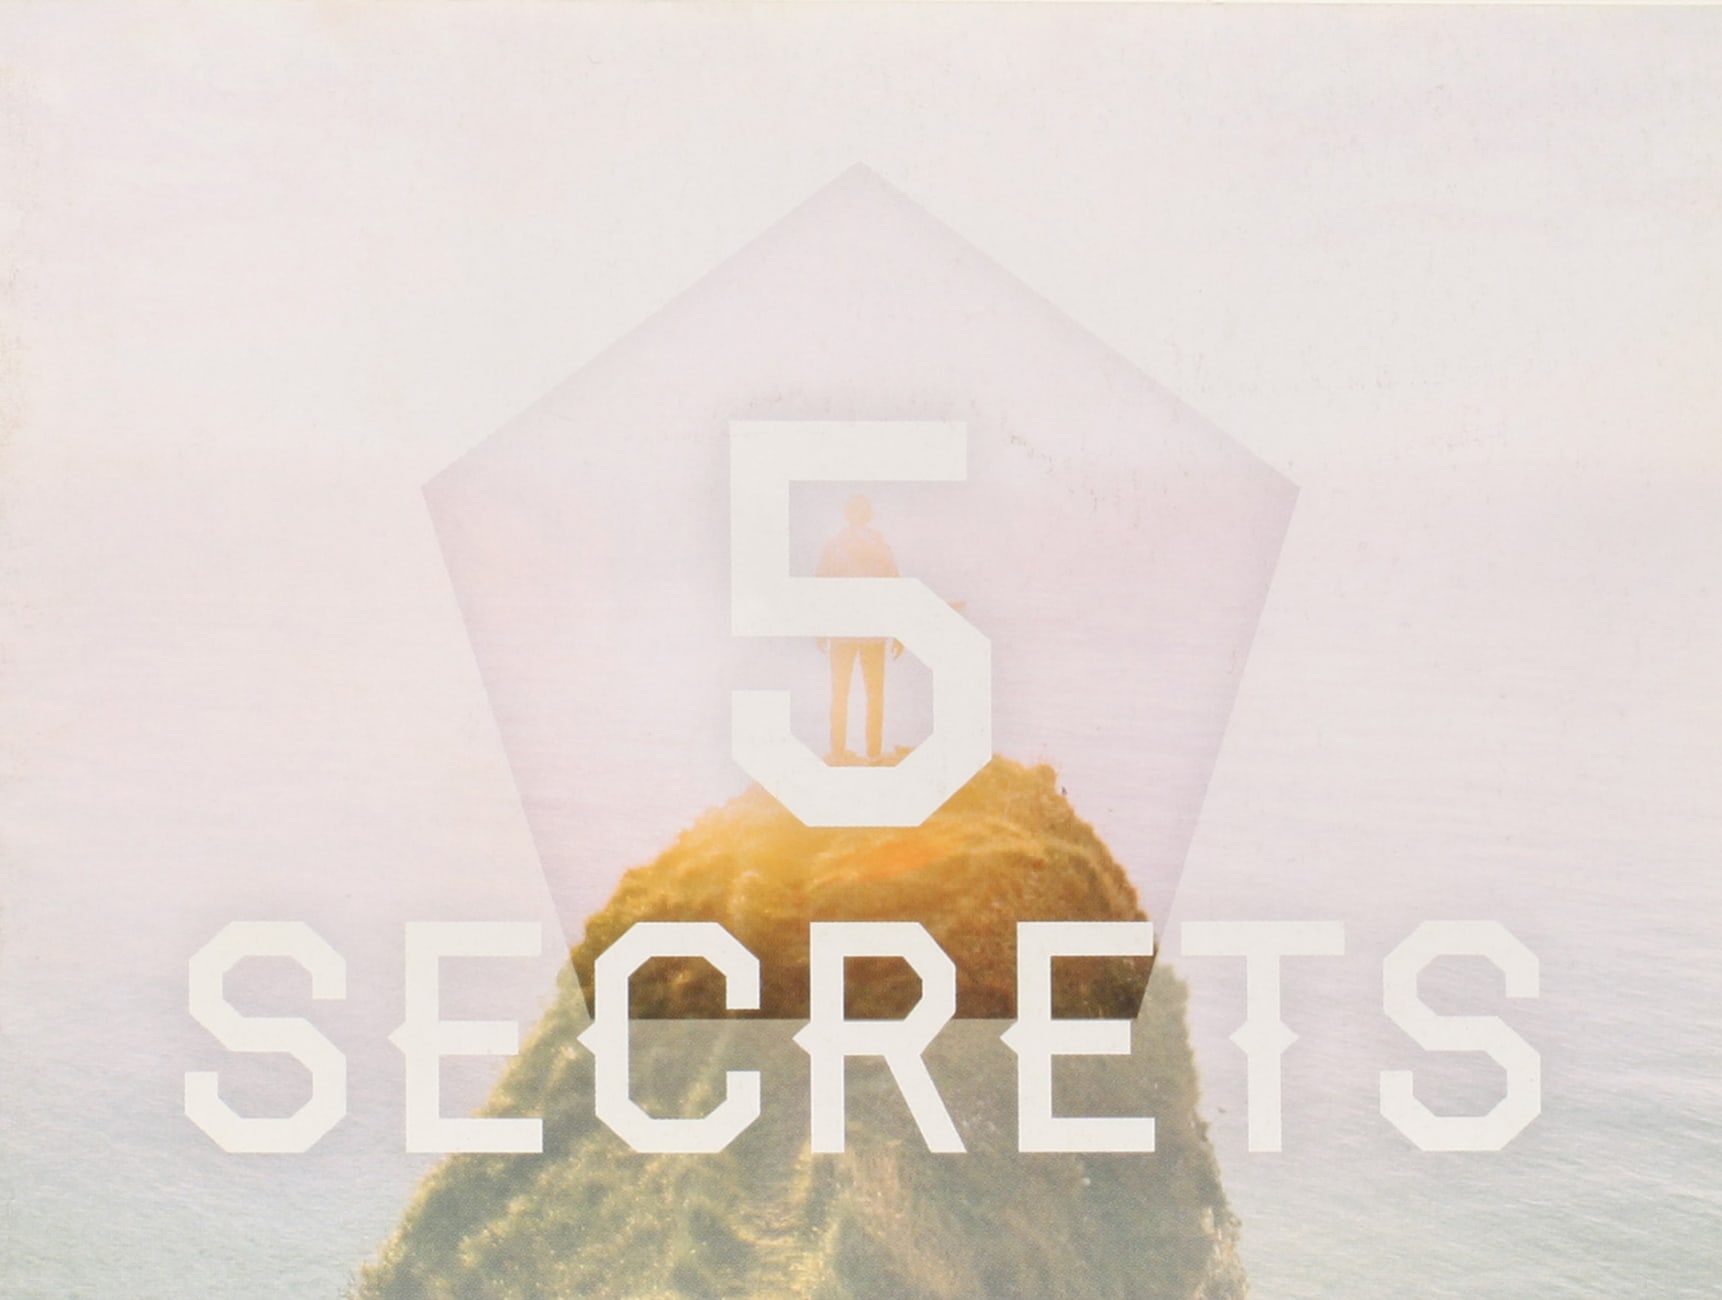 5 Secrets - 5 Things God Says About You Booklet